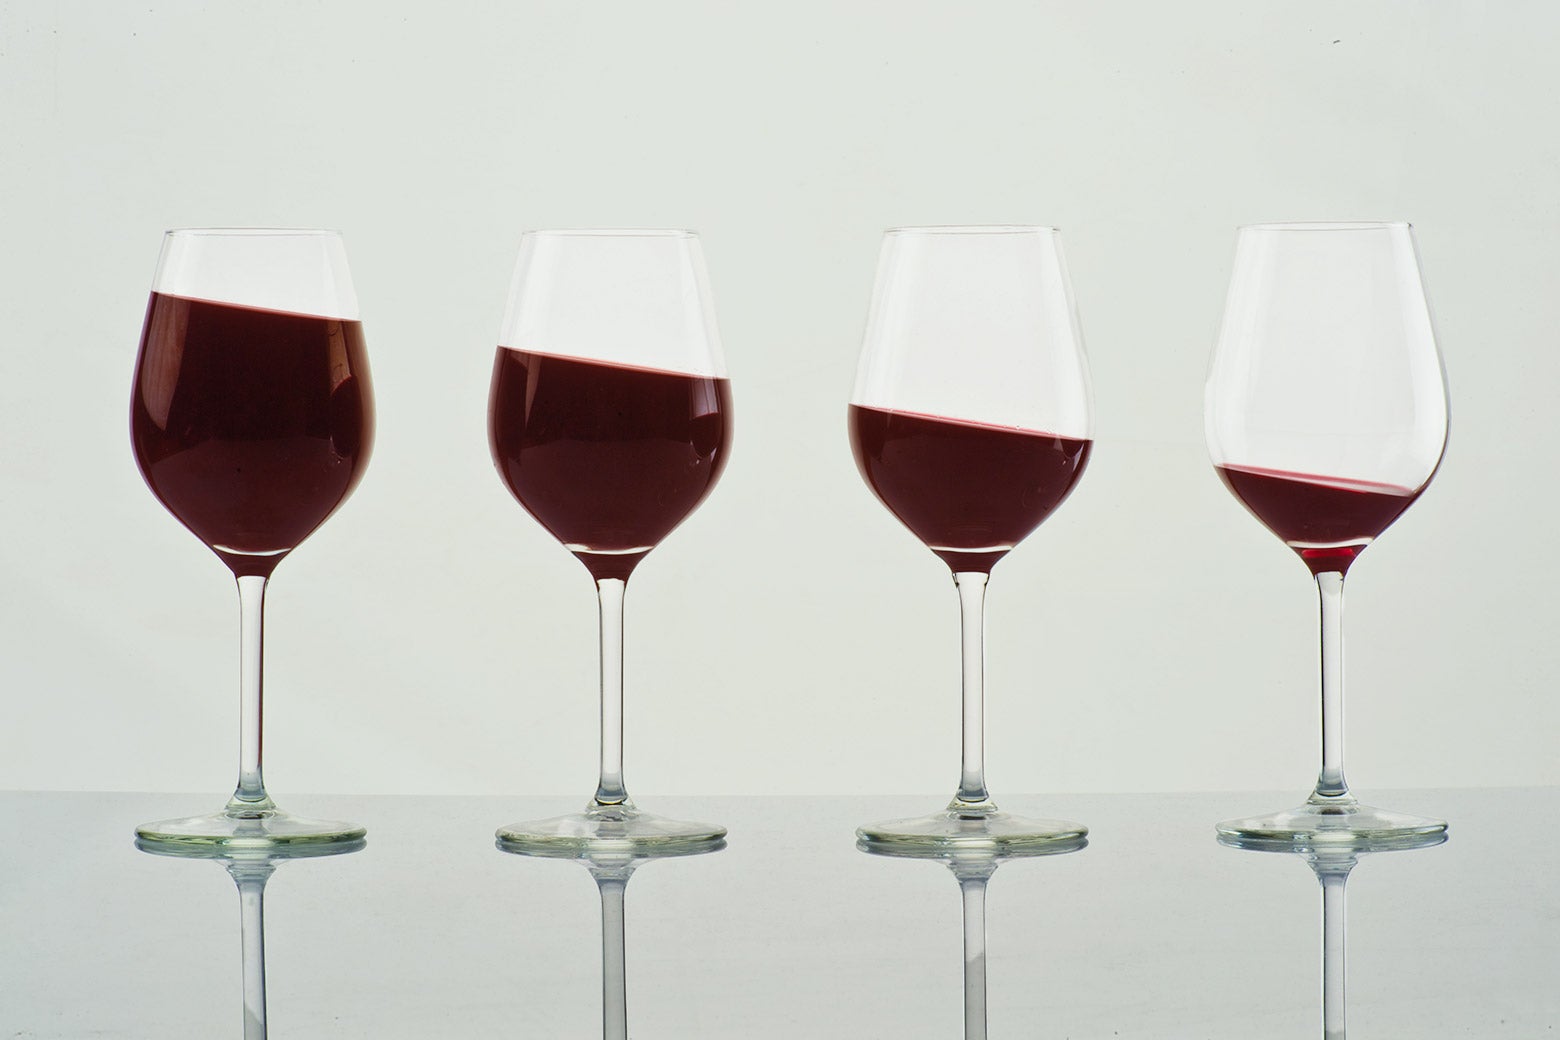 A group of four wineglasses, with each holding less wine than the last.